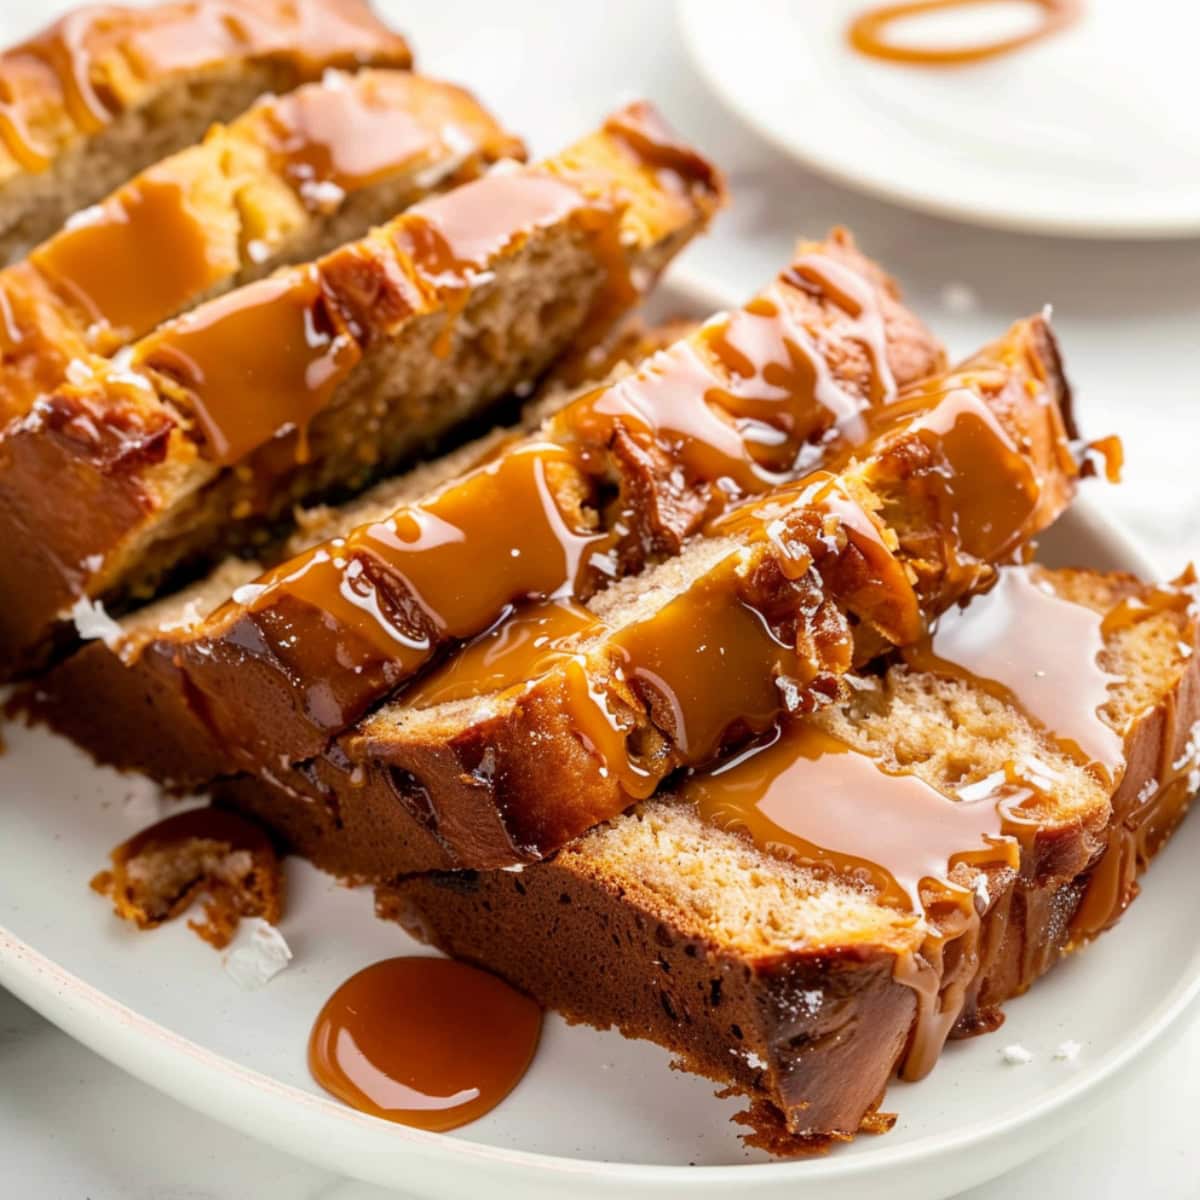 Slices of banana loaf bread on a plate drizzled with salted caramel.